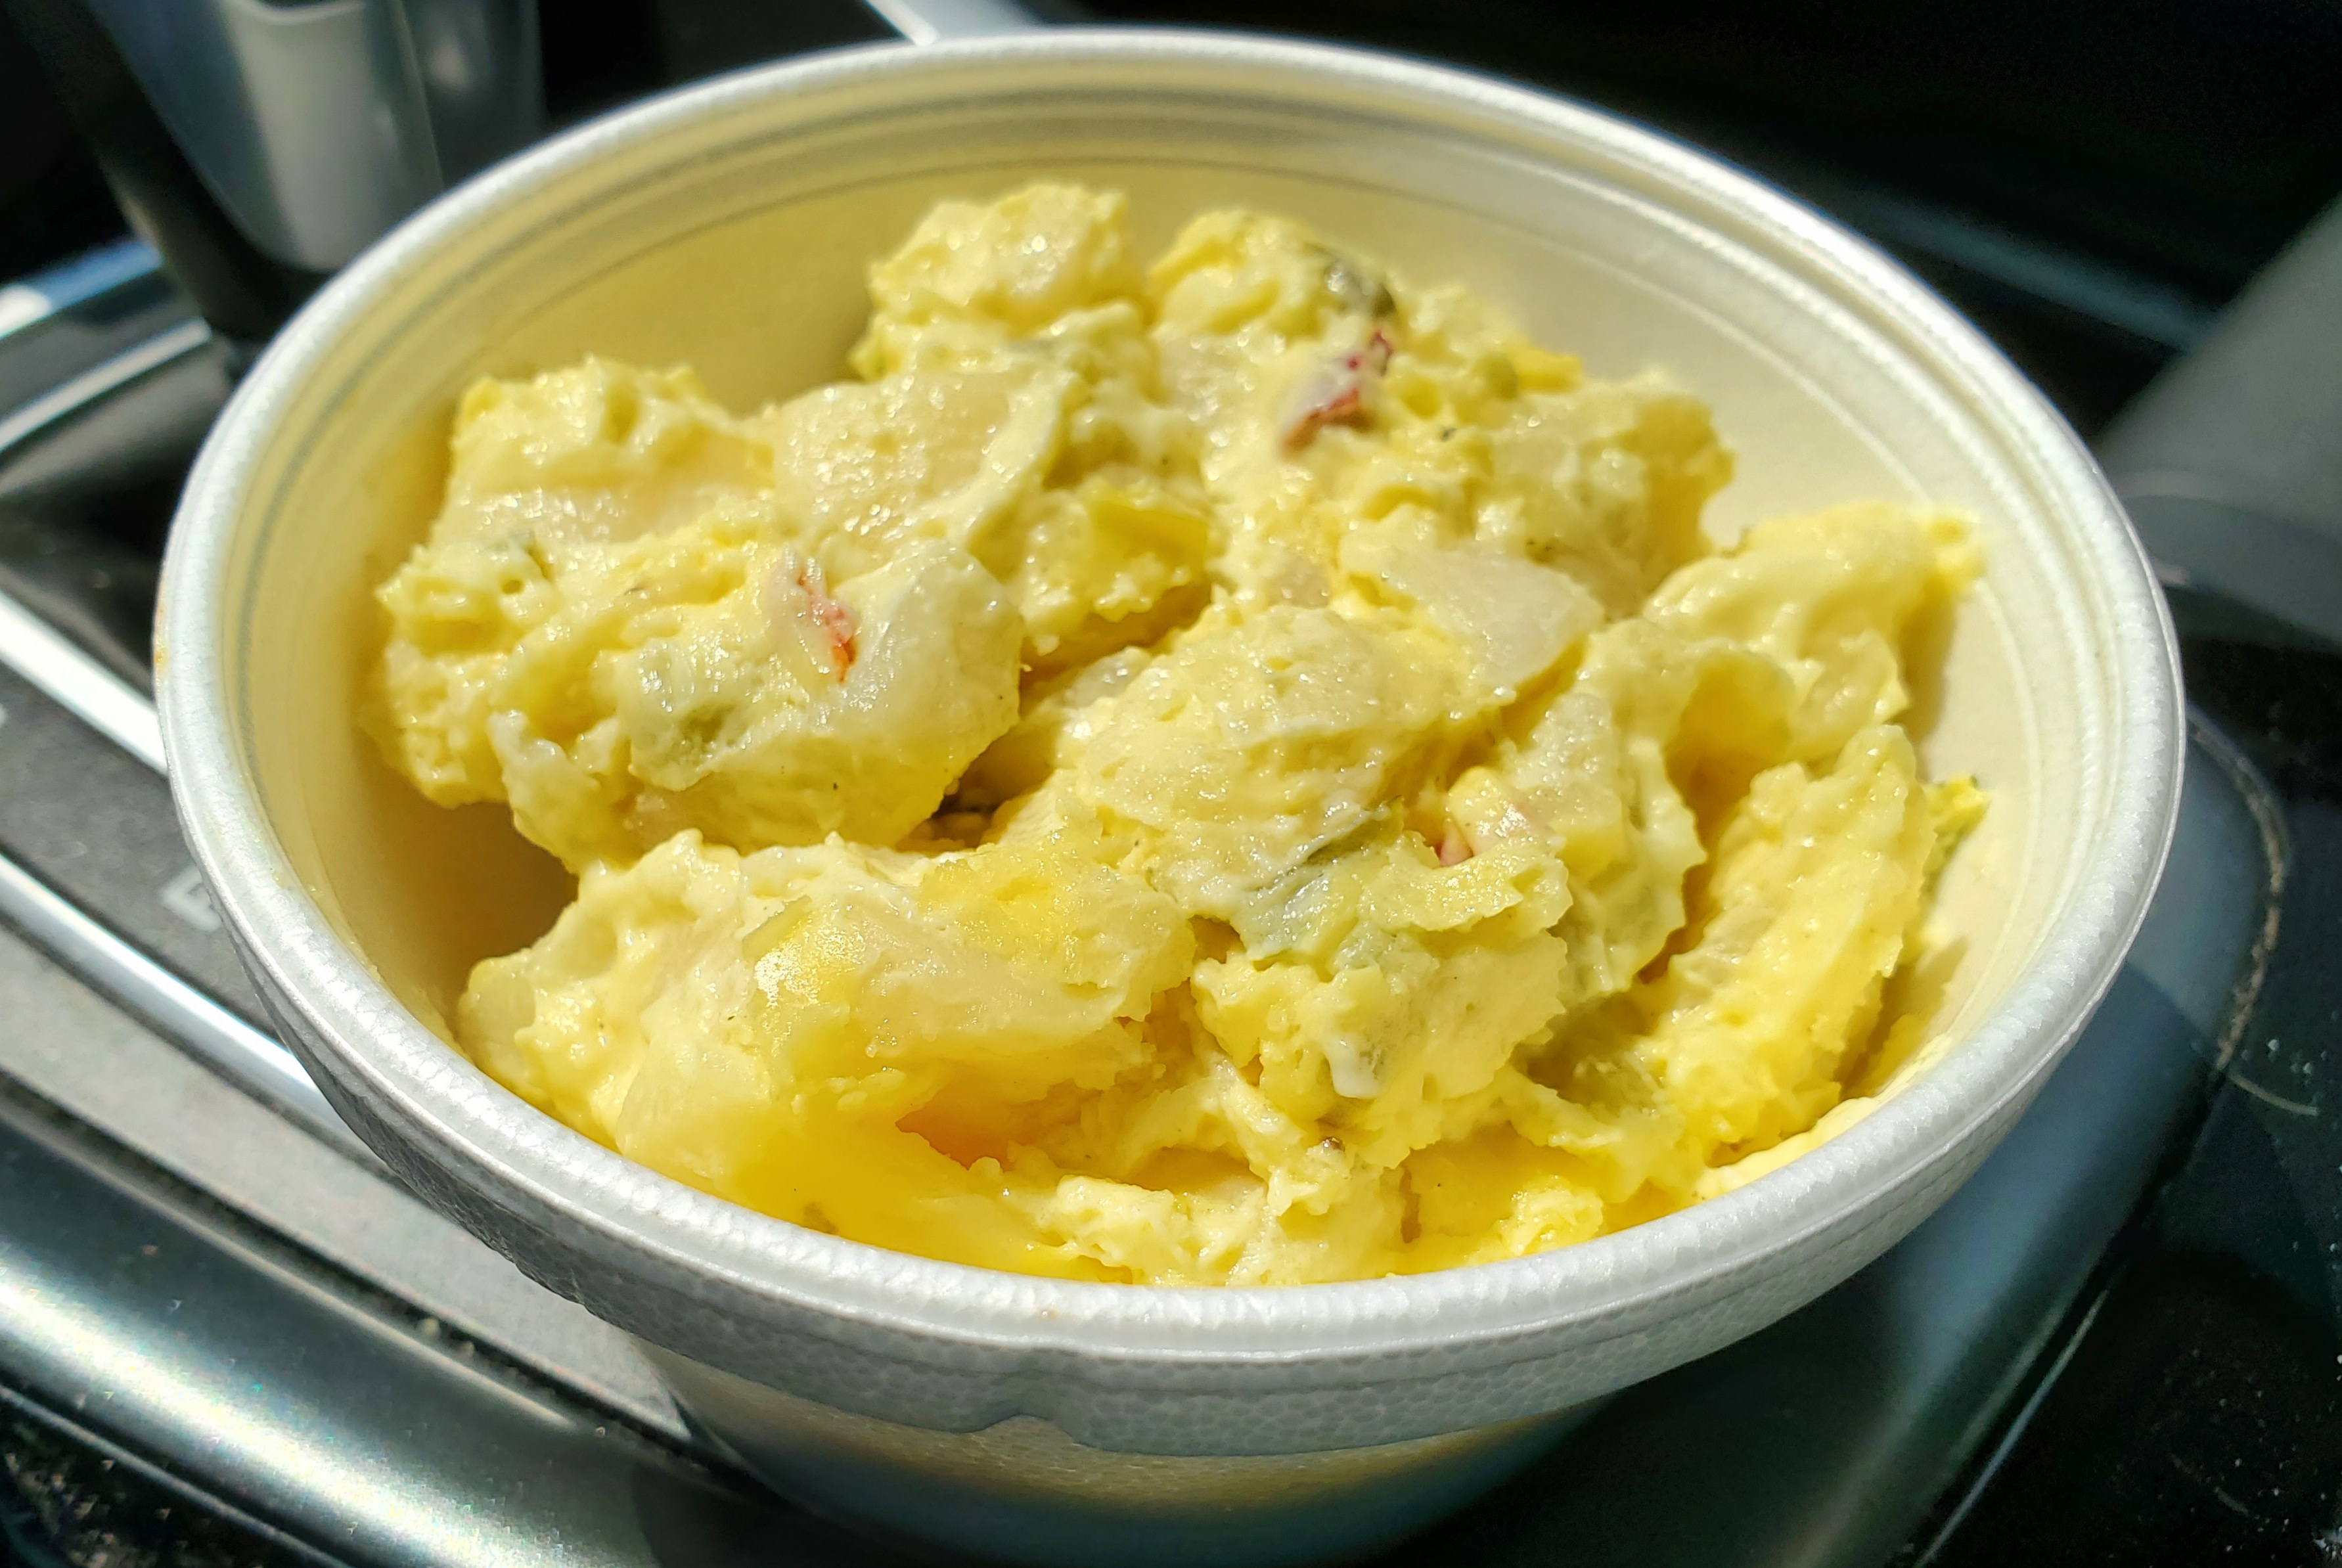 In a silver car, there is a white styrofoam bowl full of yellow potato salad. Photo by Carl Busch.